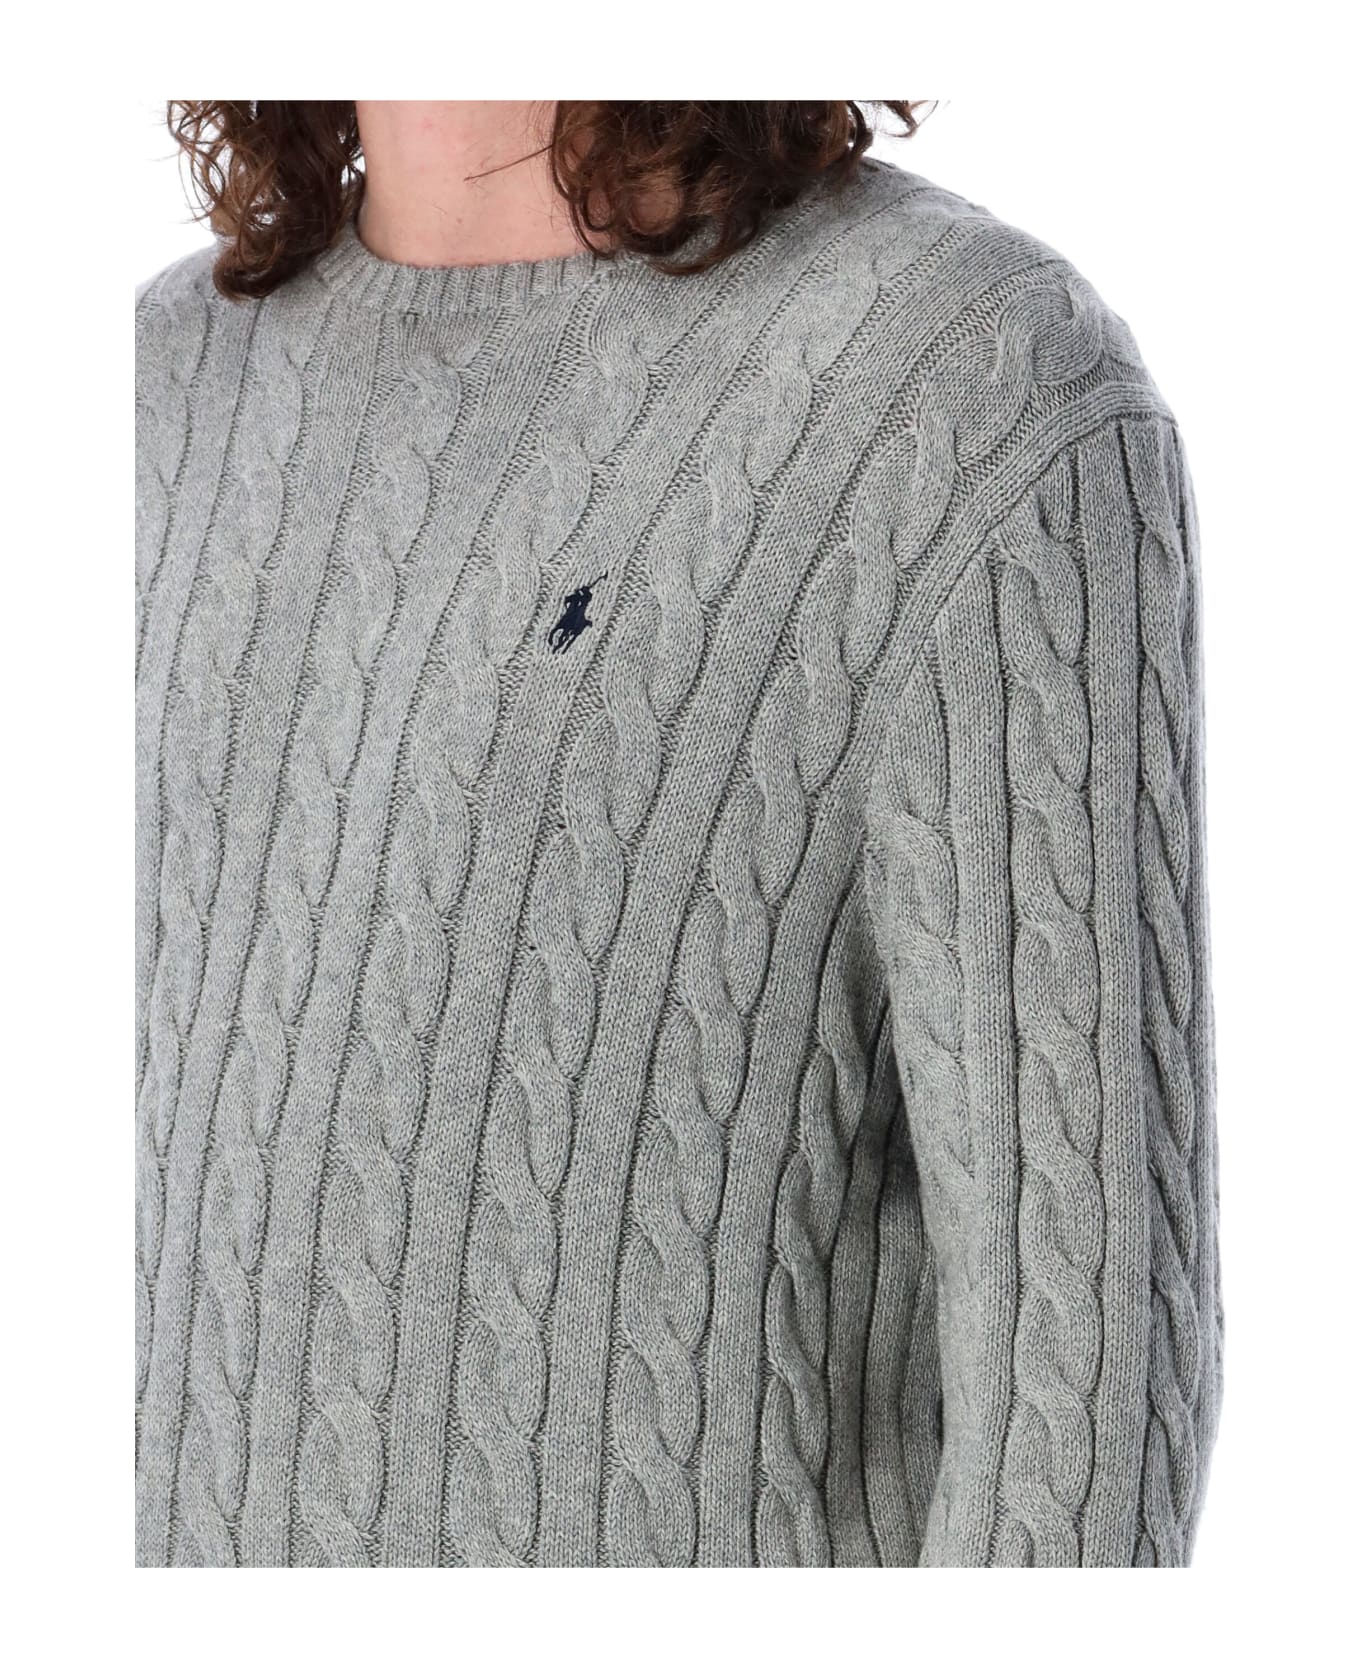 Polo Ralph Lauren Cable Knit Sweater - GREY ニットウェア